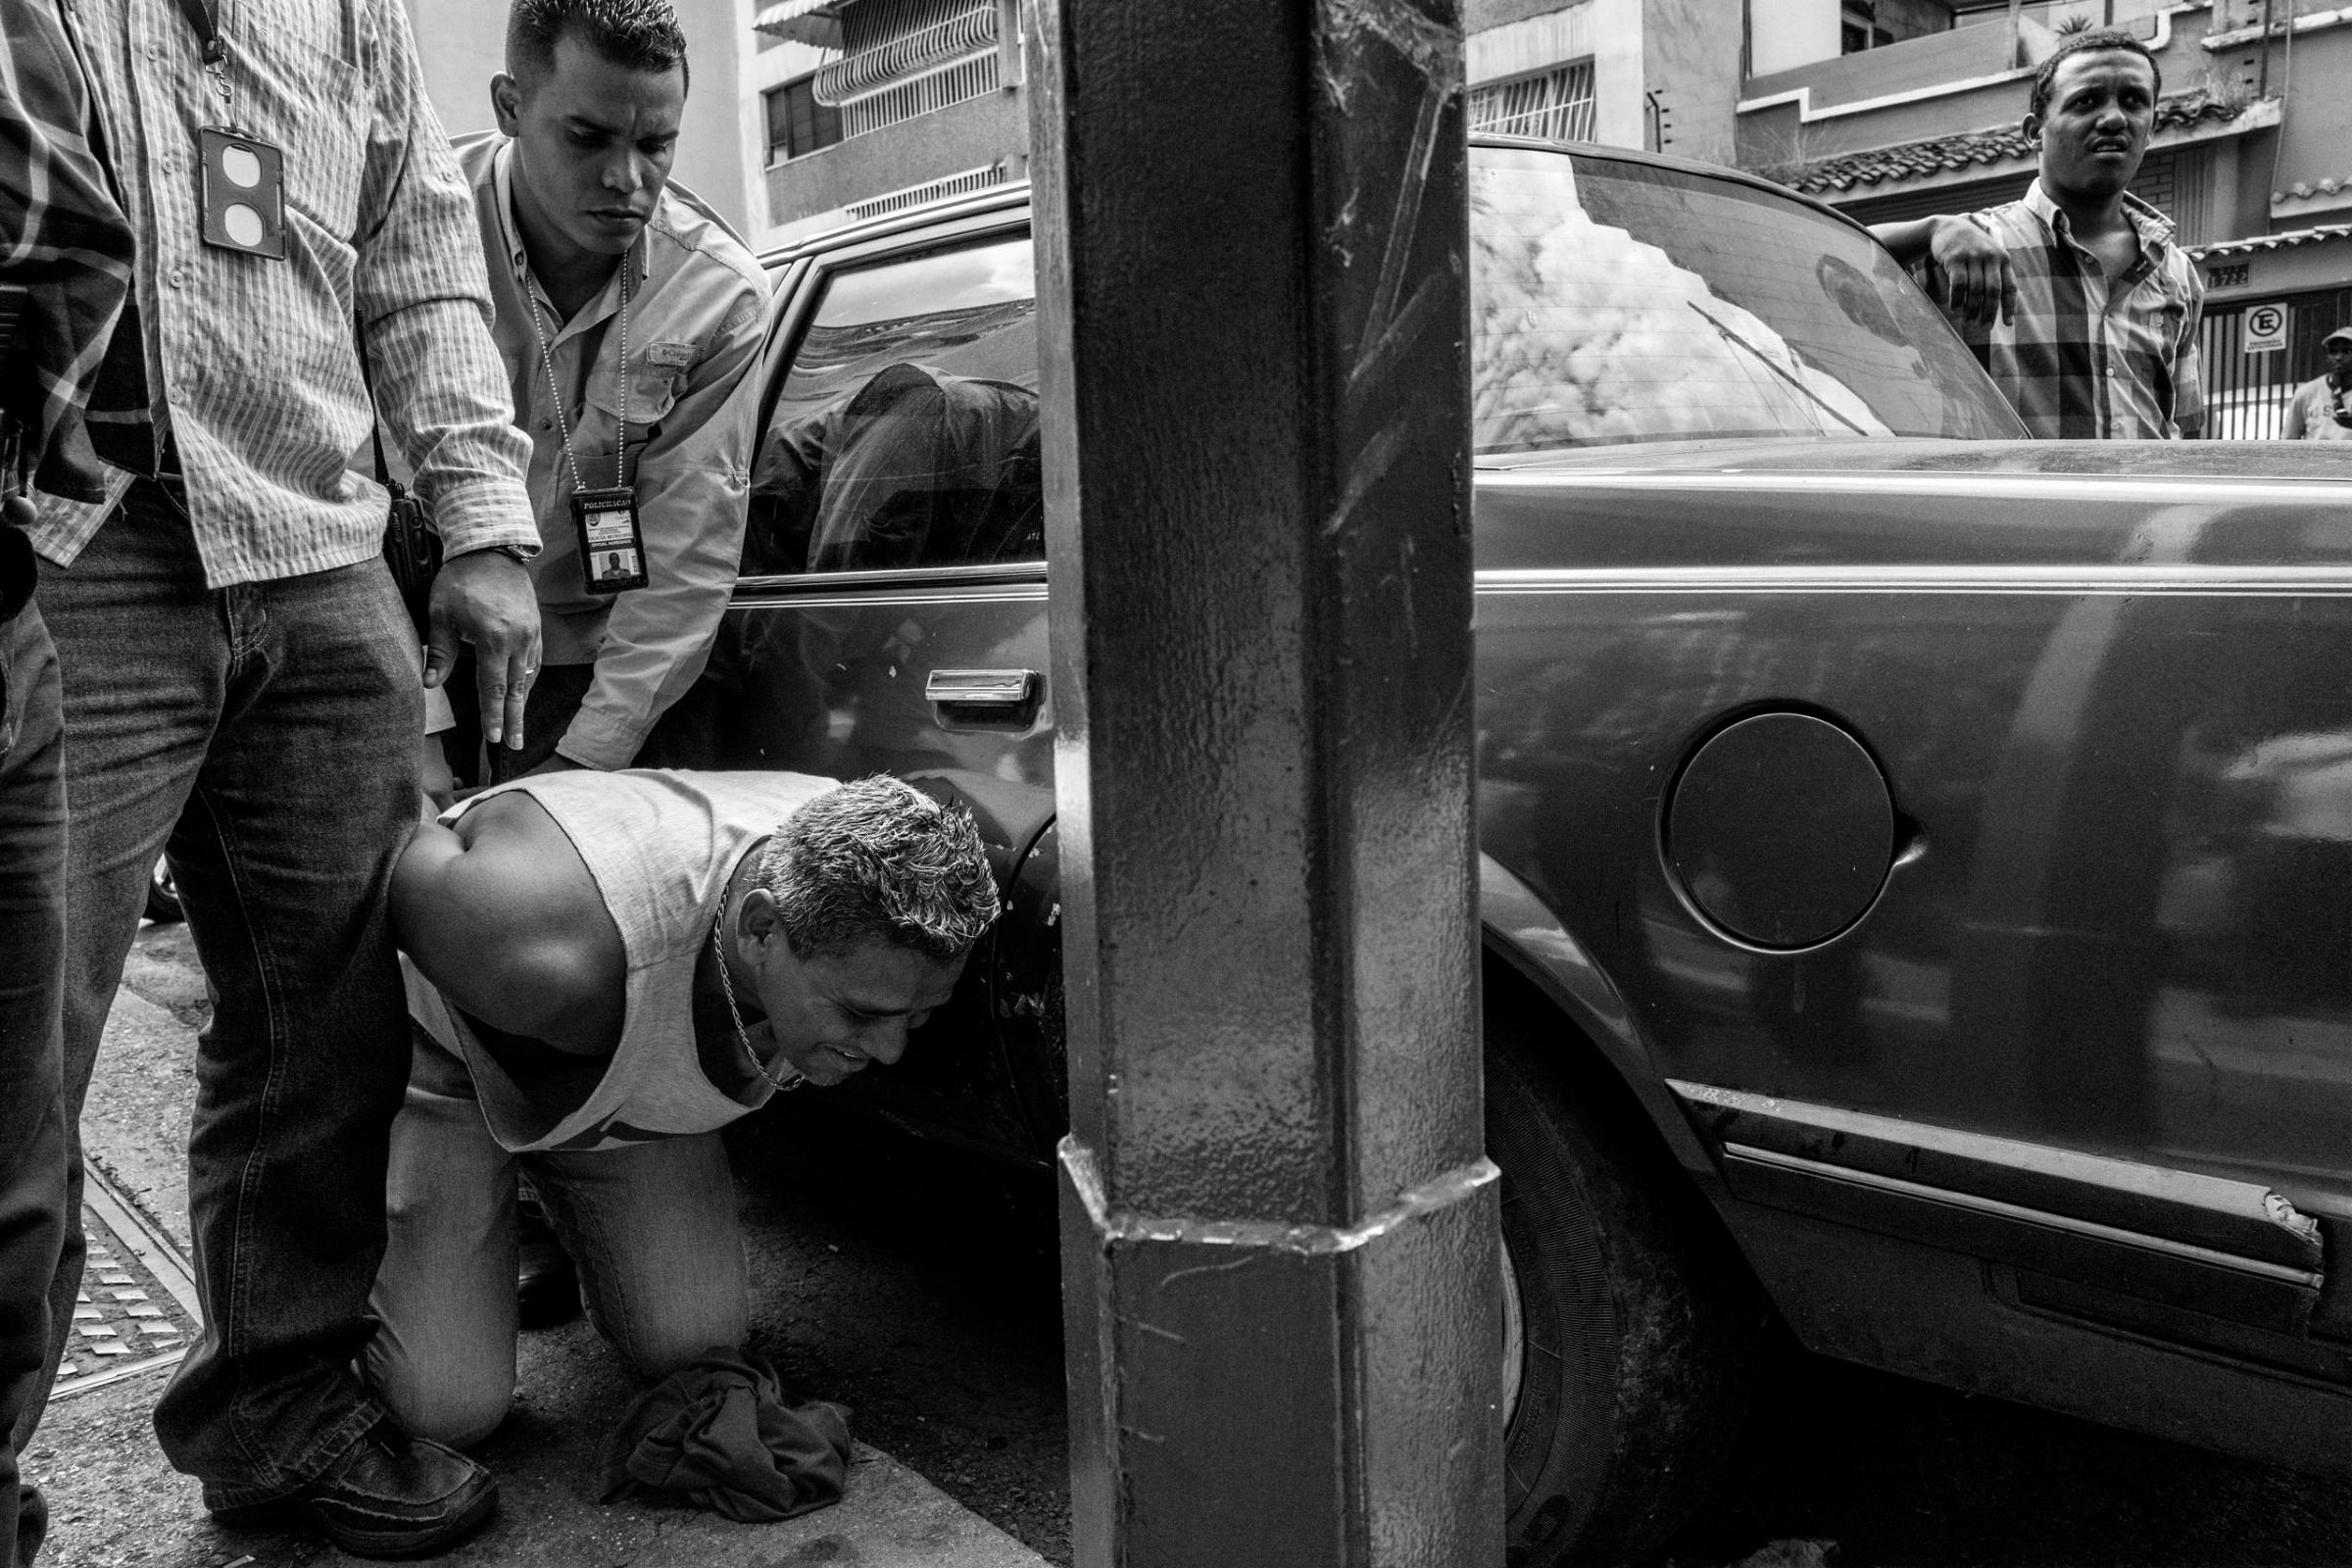 An alleged thief is arrested by police in Caracas, Venezuela. The economic and political crisis in Venezuela has led to increased crime and abuses by police, May 2016.